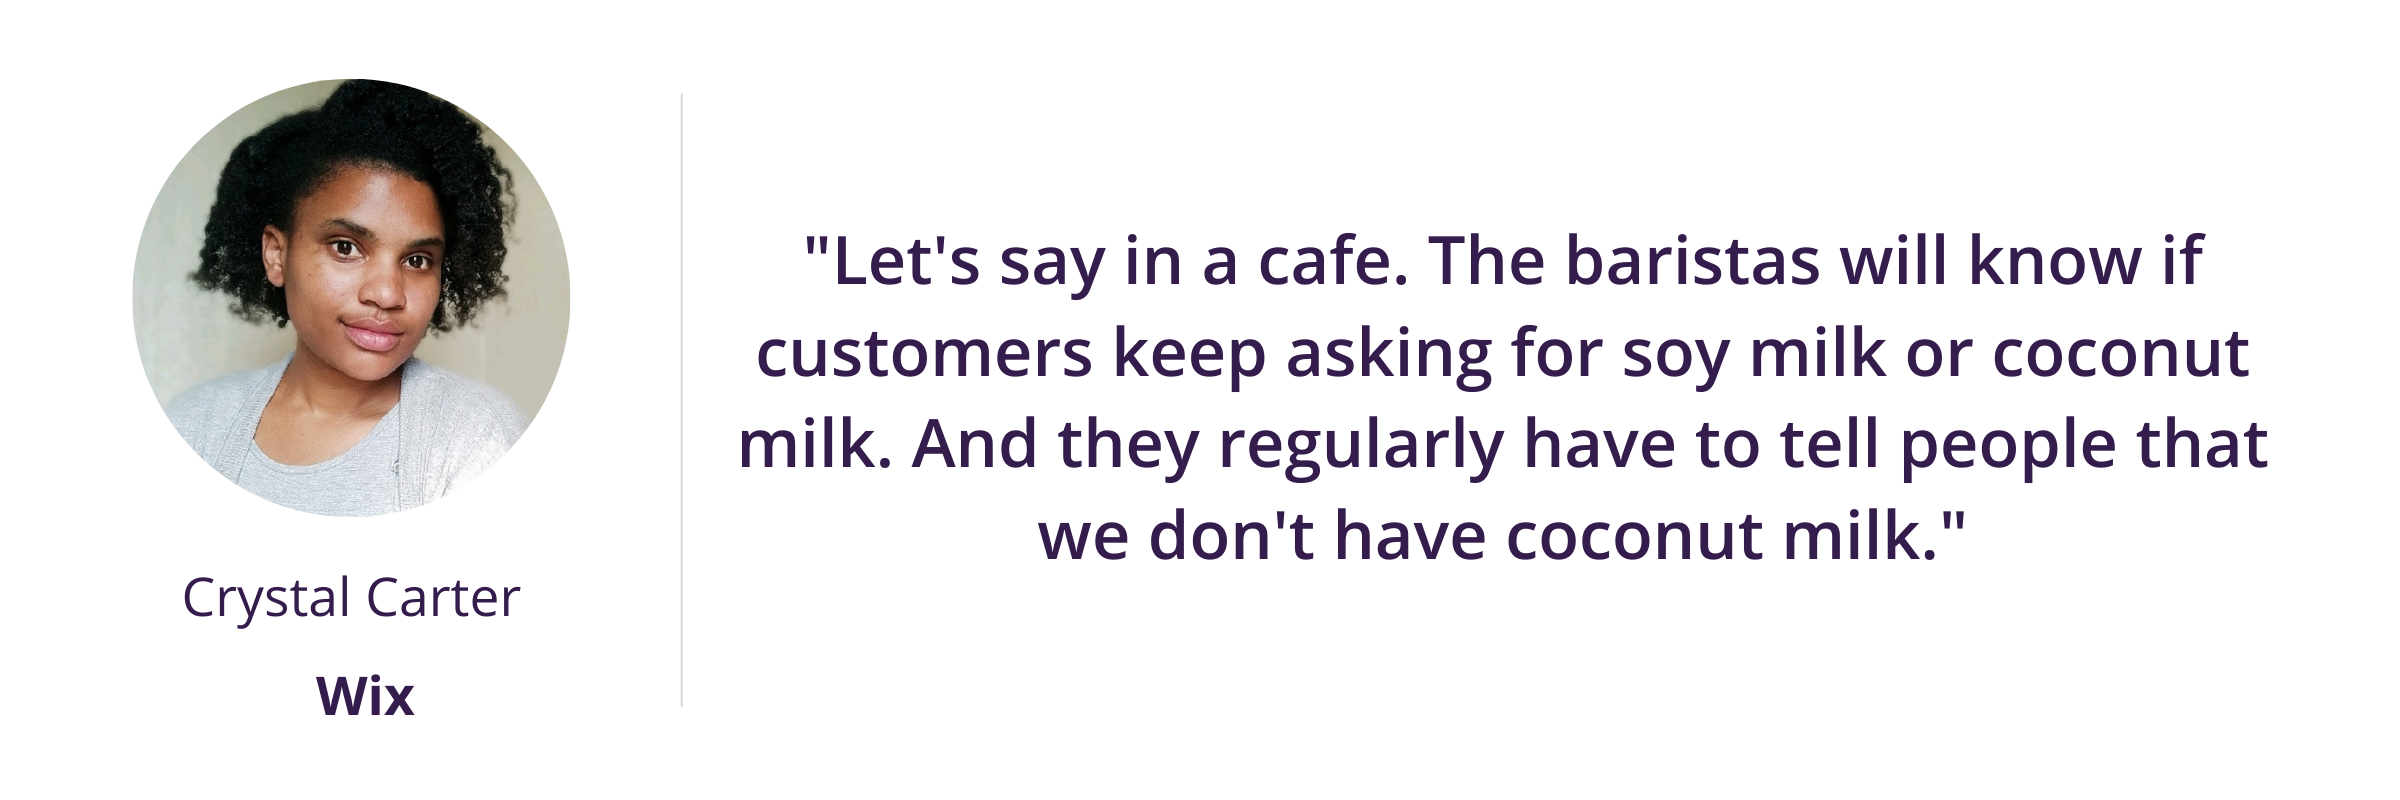 "Let's say in a cafe. The baristas will know if customers keep asking for soy milk or coconut milk. And they regularly have to tell people that we don't have coconut milk."